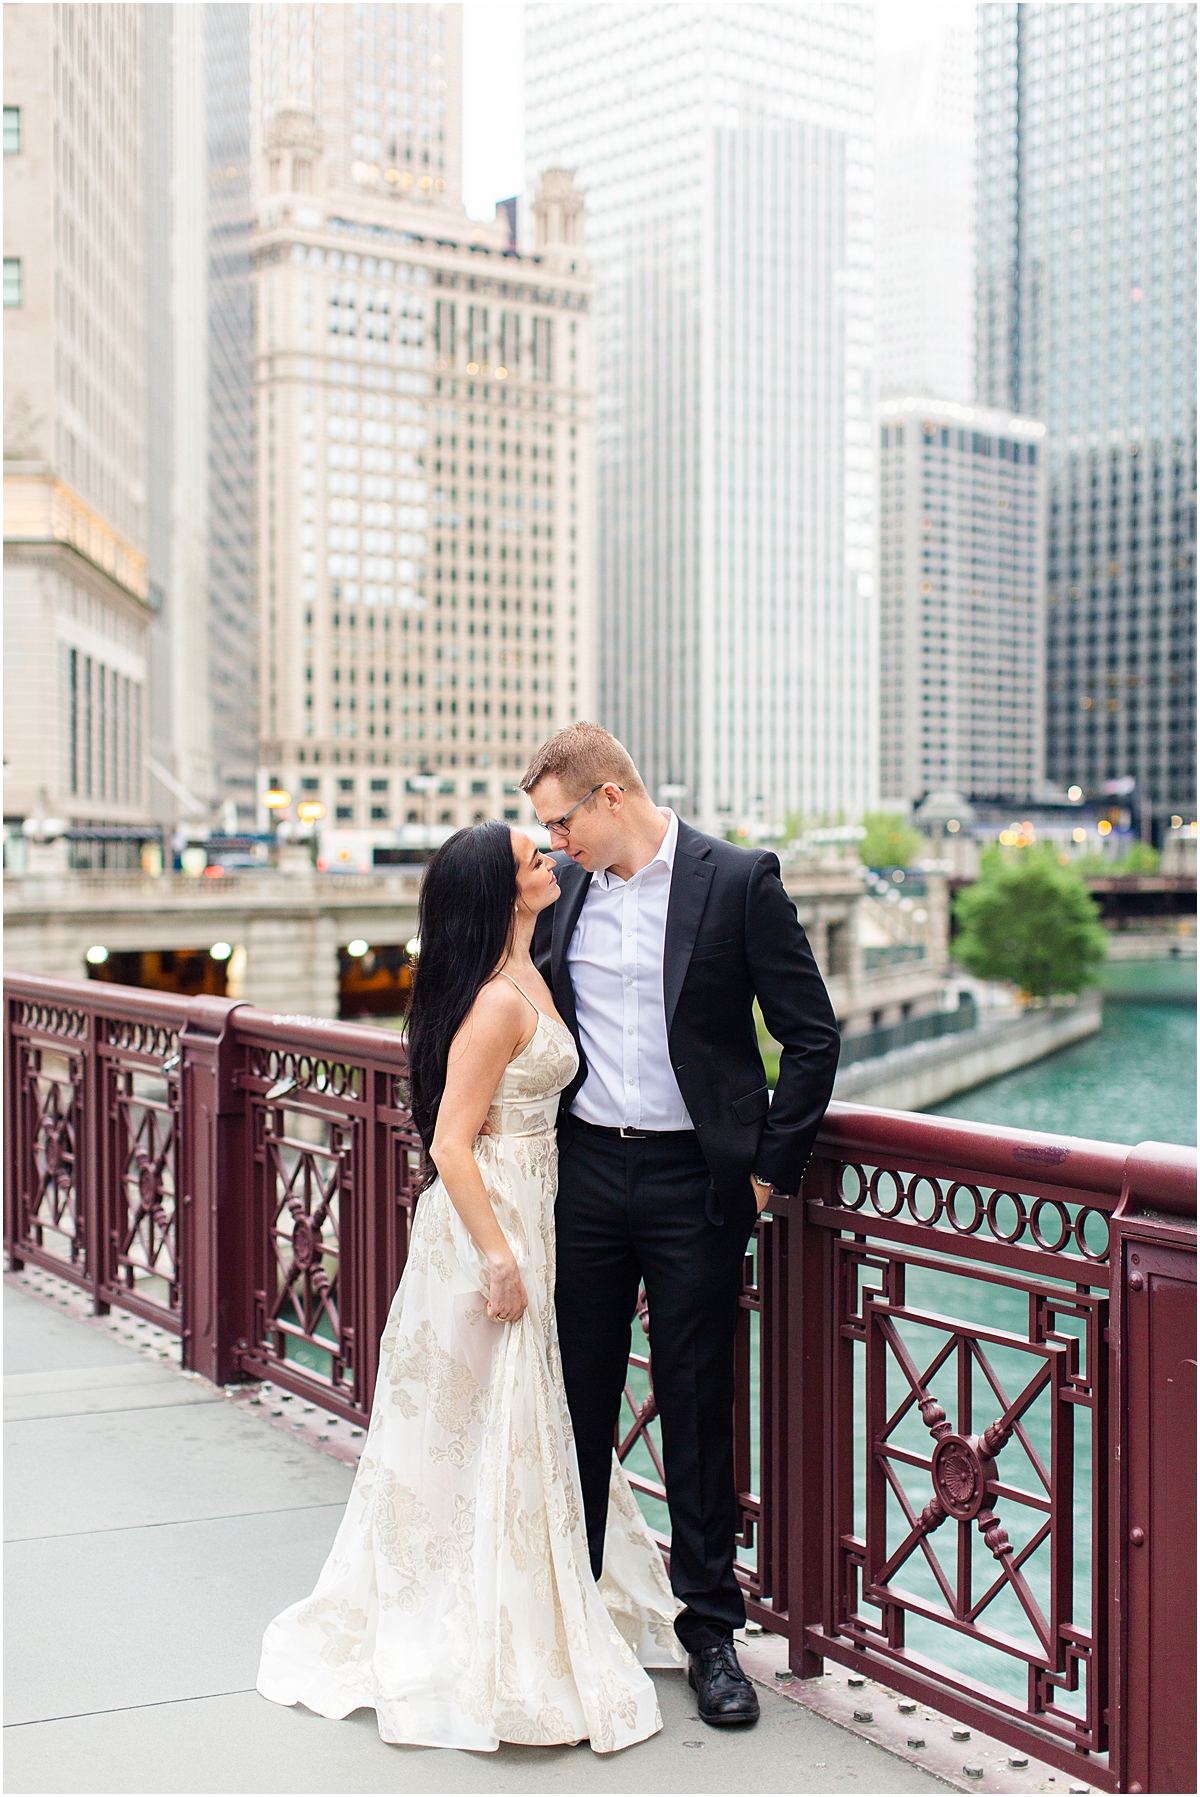 12 Best Chicago Engagement Session Locations